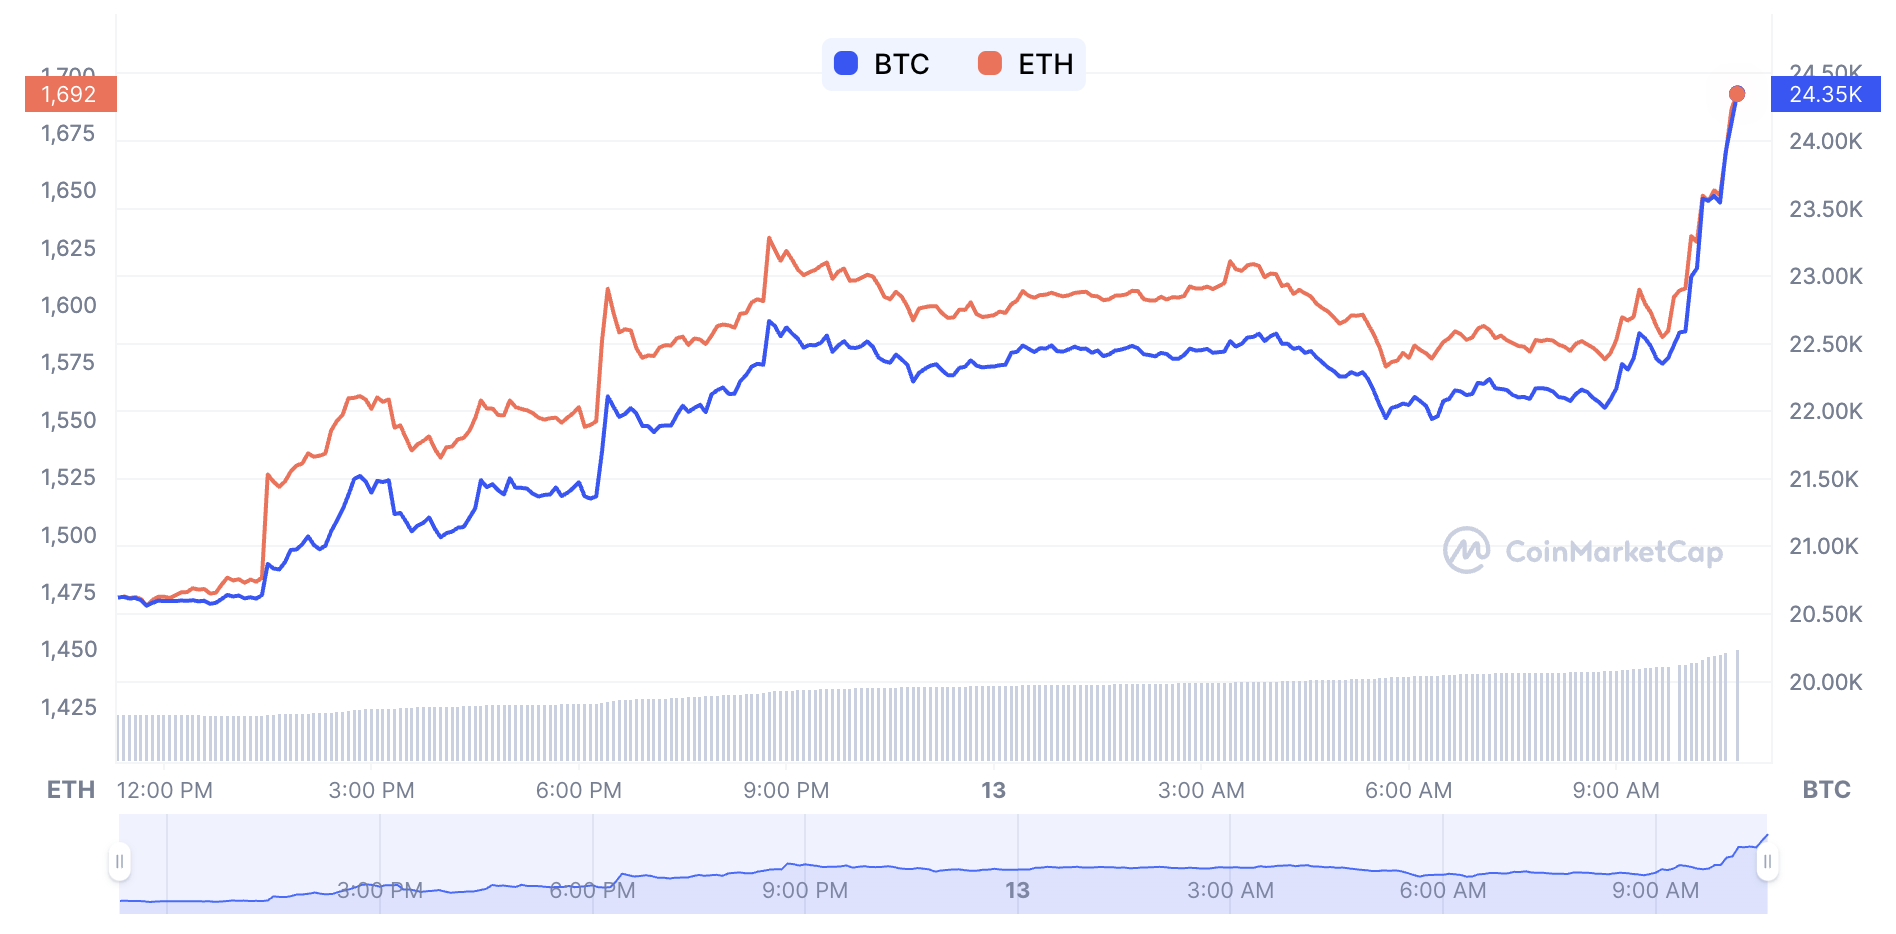 An image of bitcoin and ether prices compared to USD in the past 24-hours